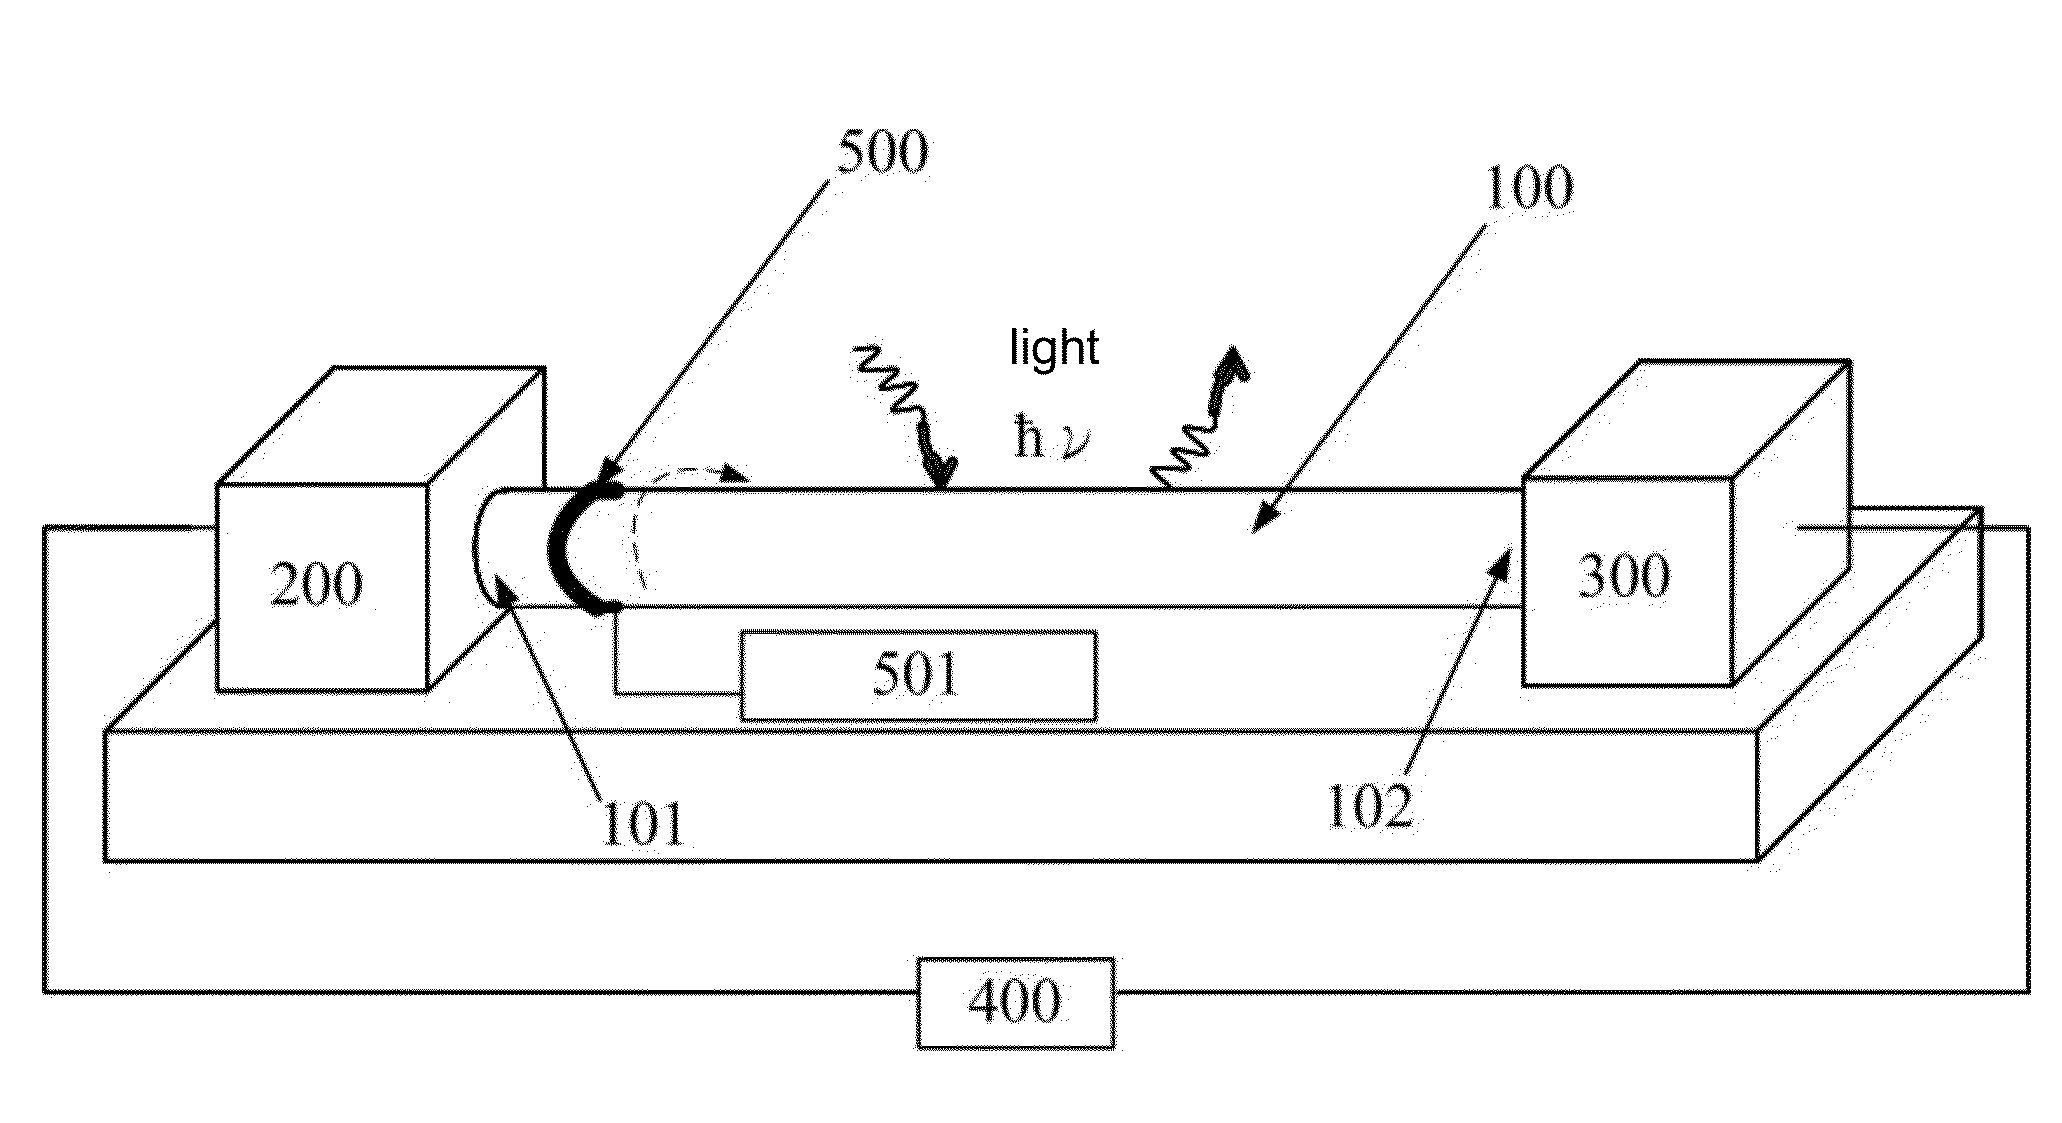 Semiconductive nanowire solid state optical device and control method thereof